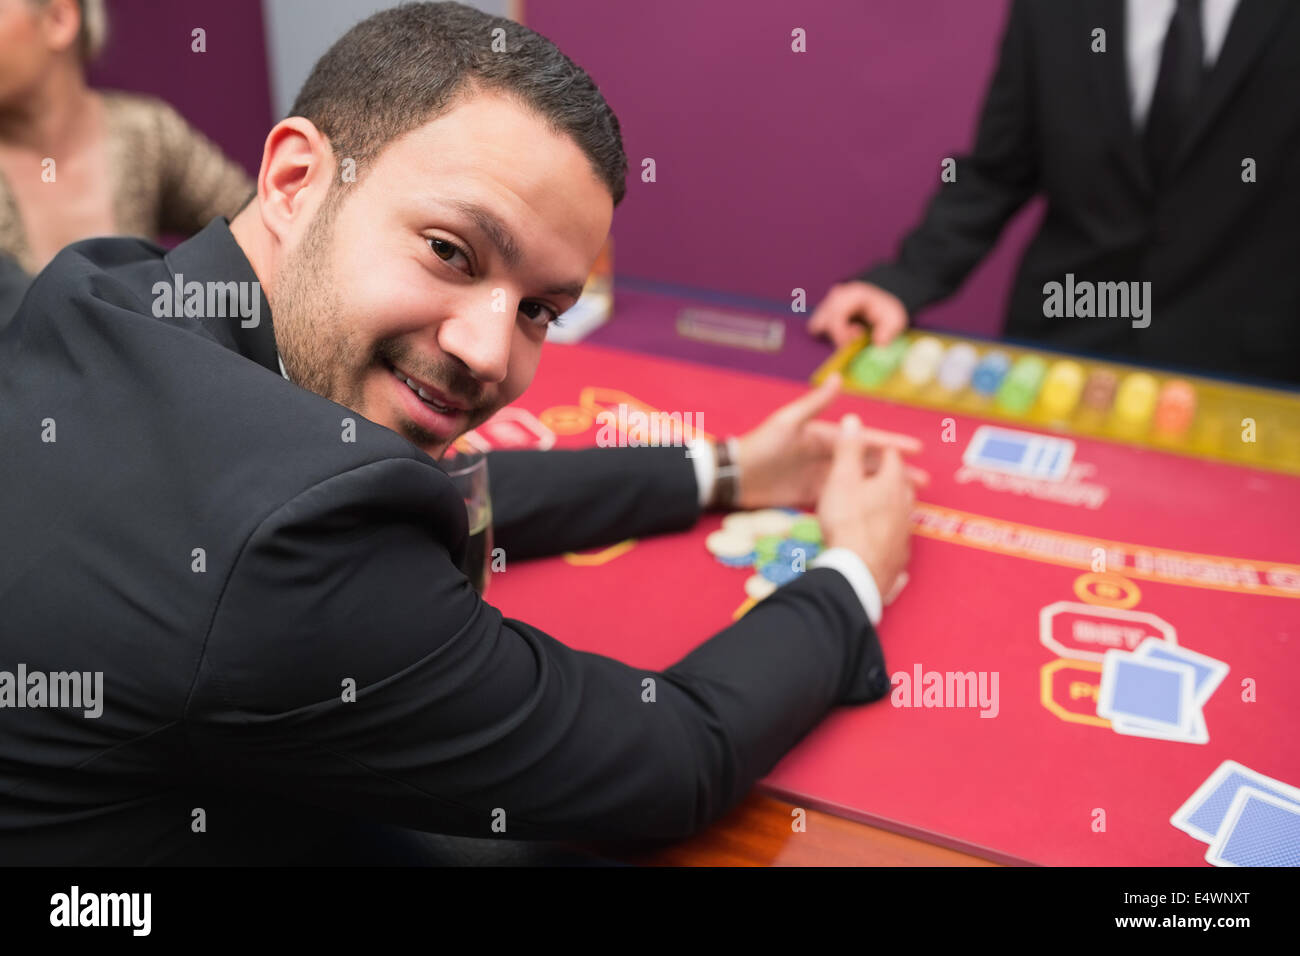 Man looking up from claiming his winnings Stock Photo